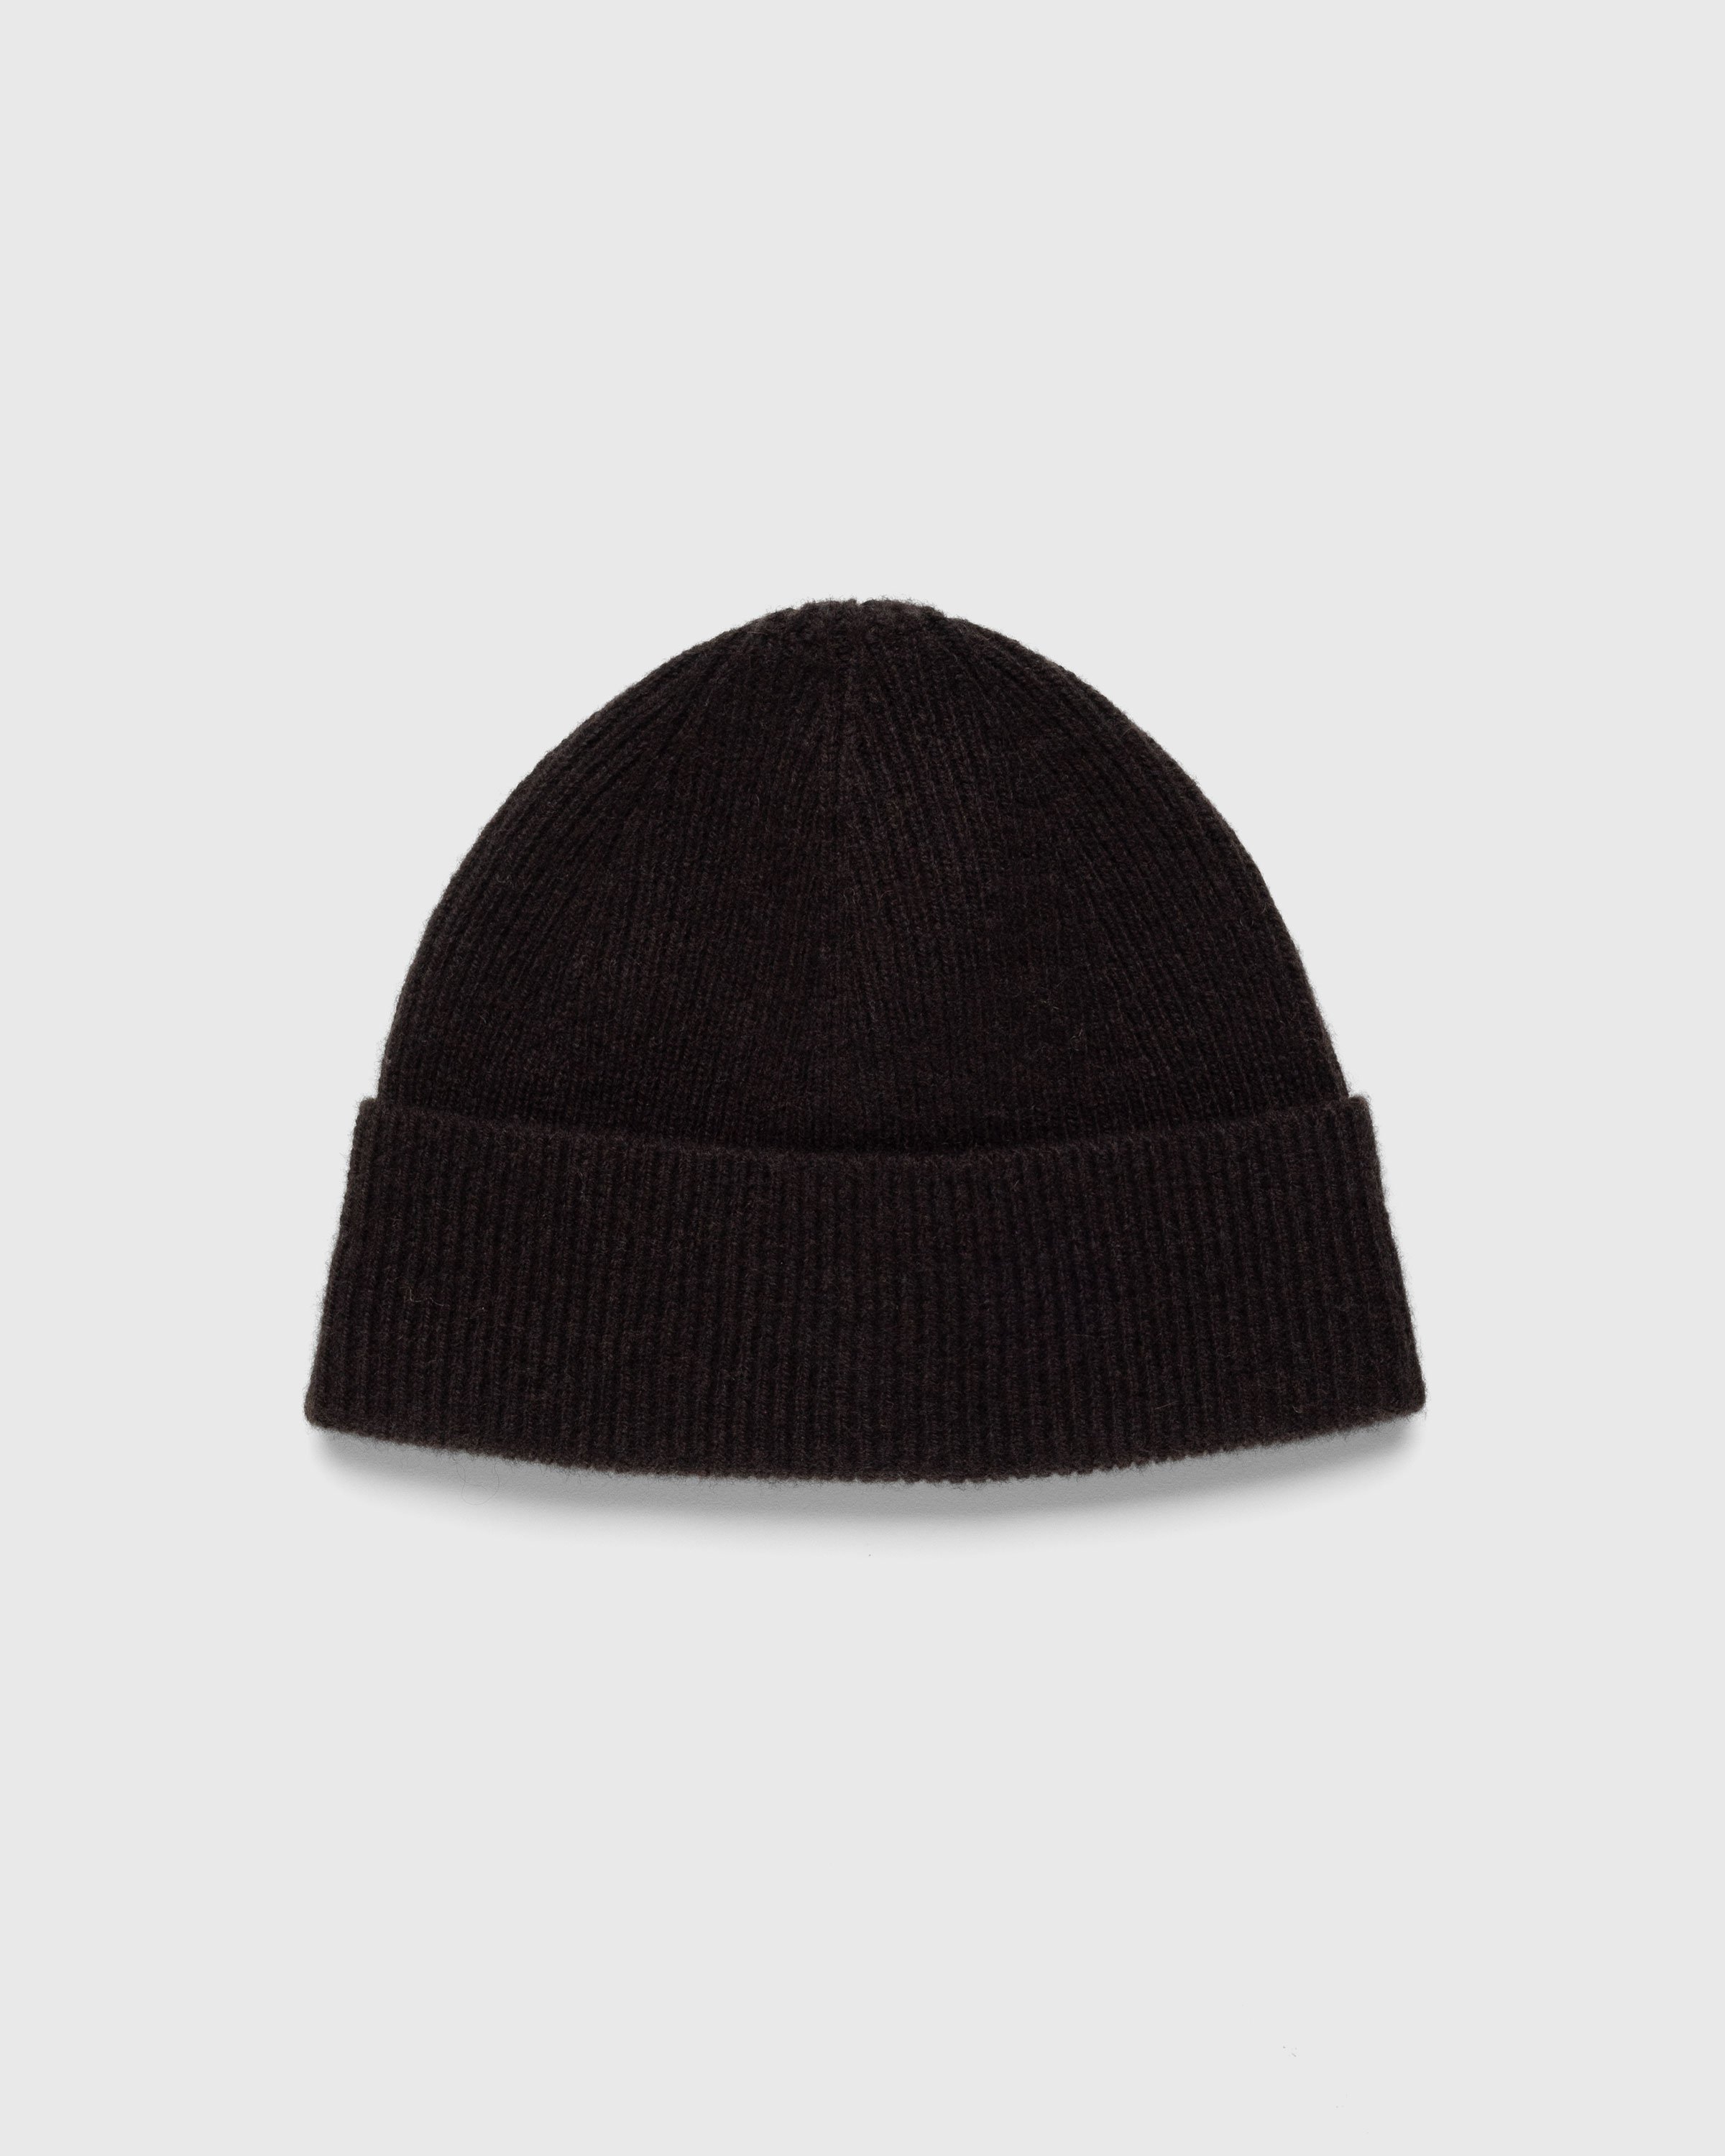 Acne Studios - Wool Cashmere Beanie Brown - Accessories - Brown - Image 2